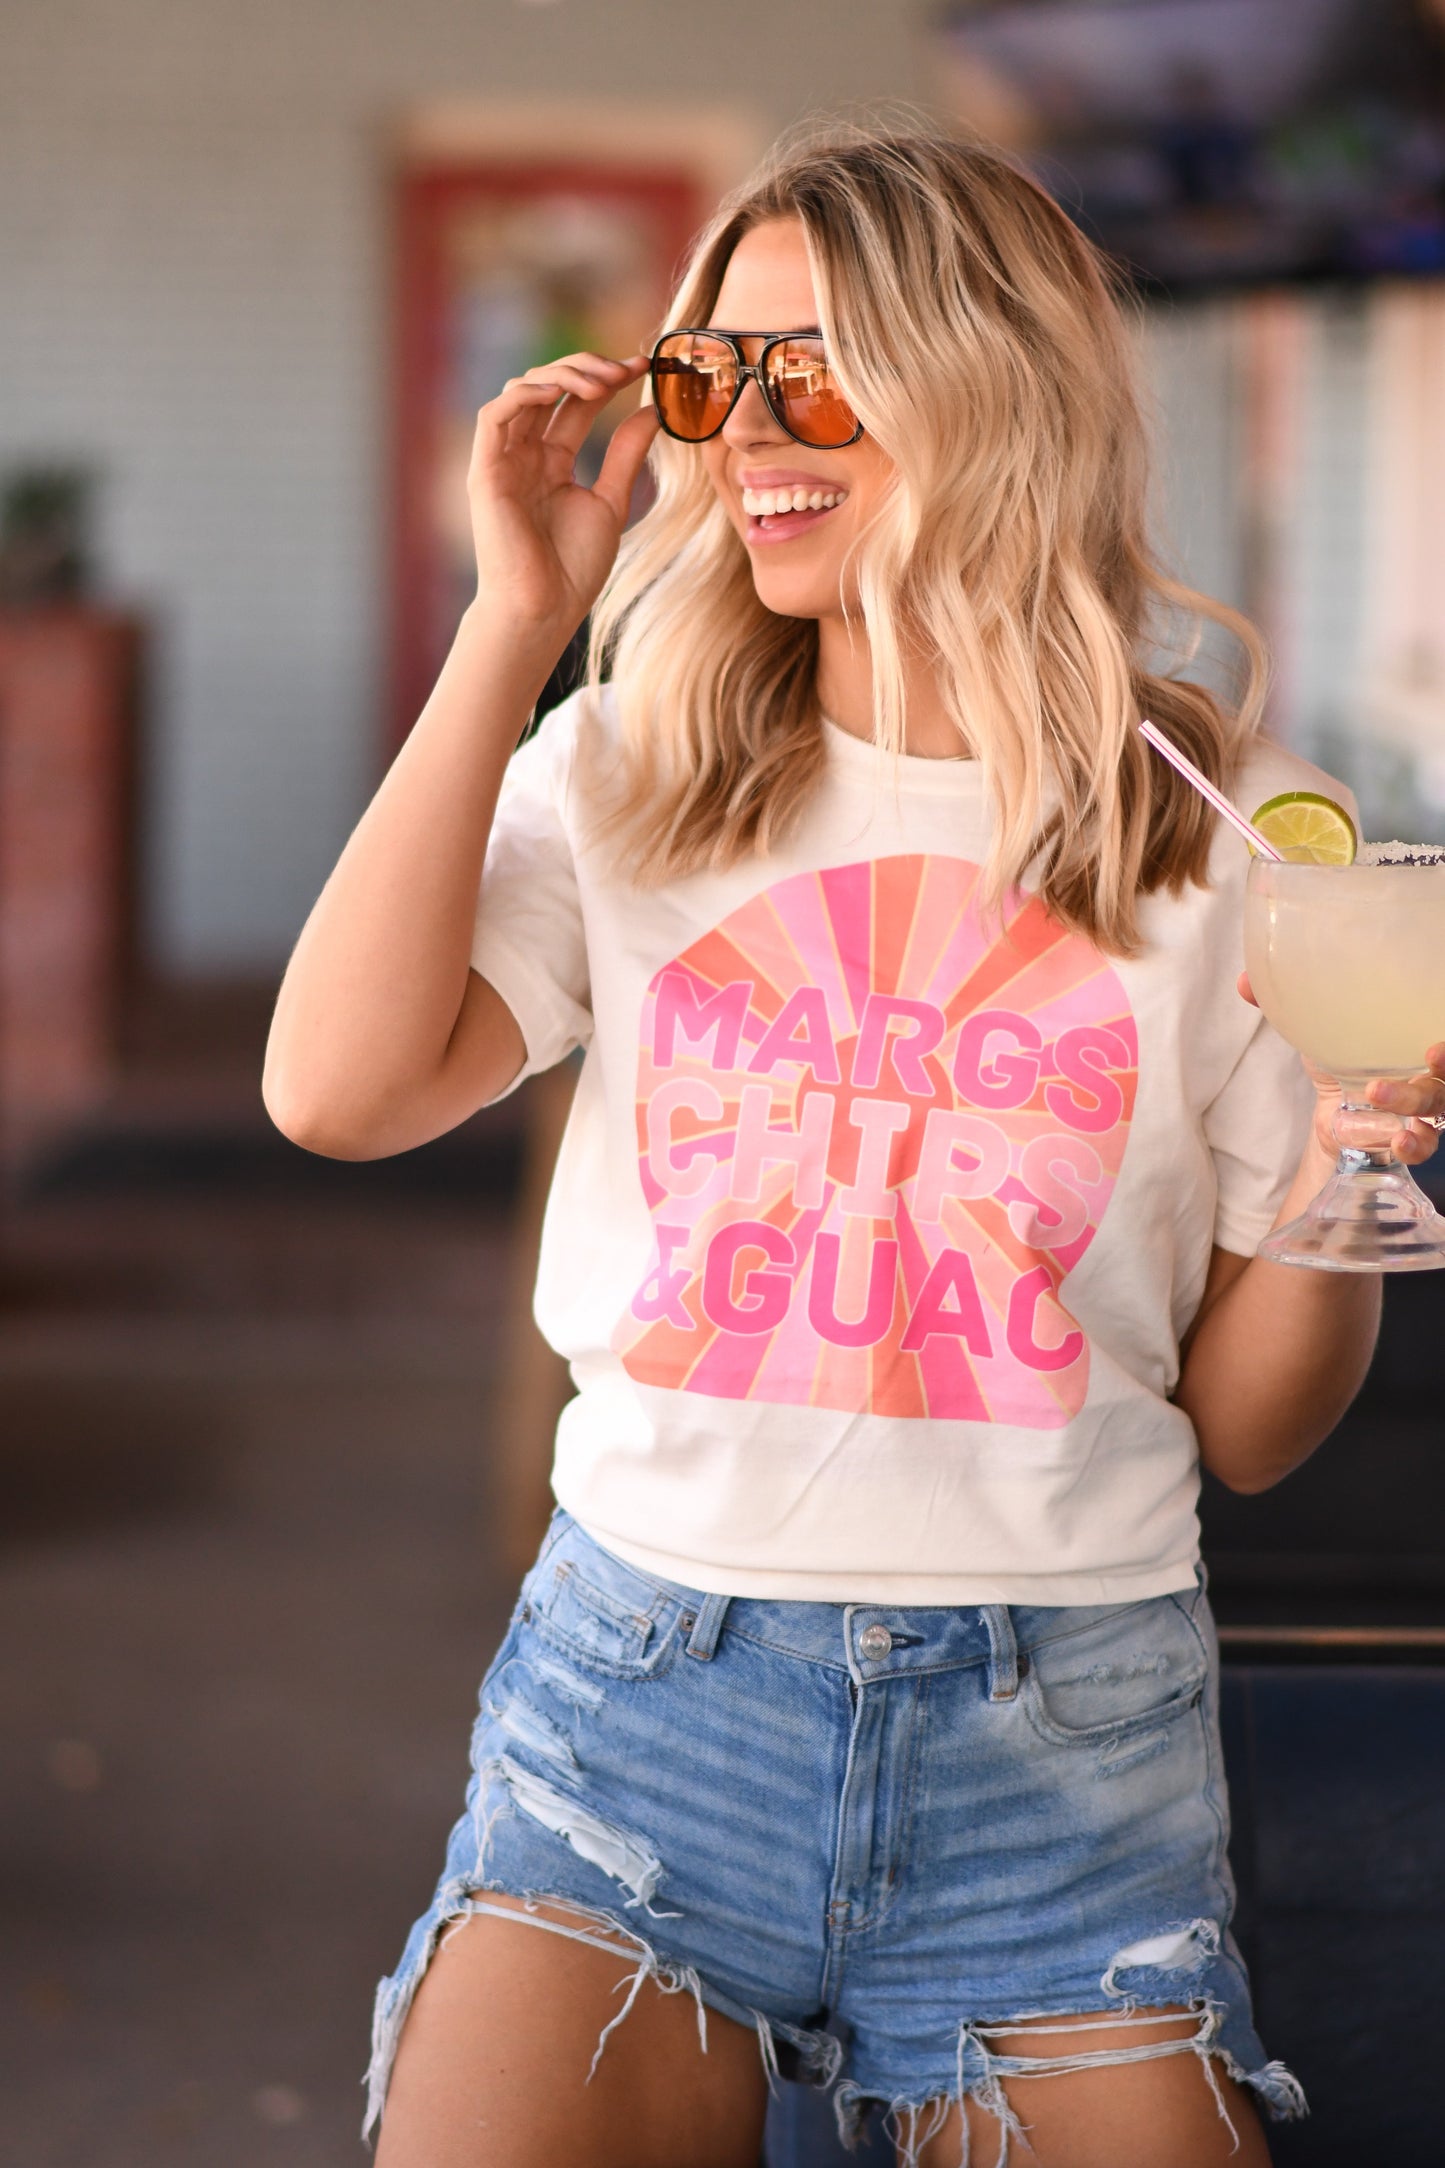 Margs chips and guac tee